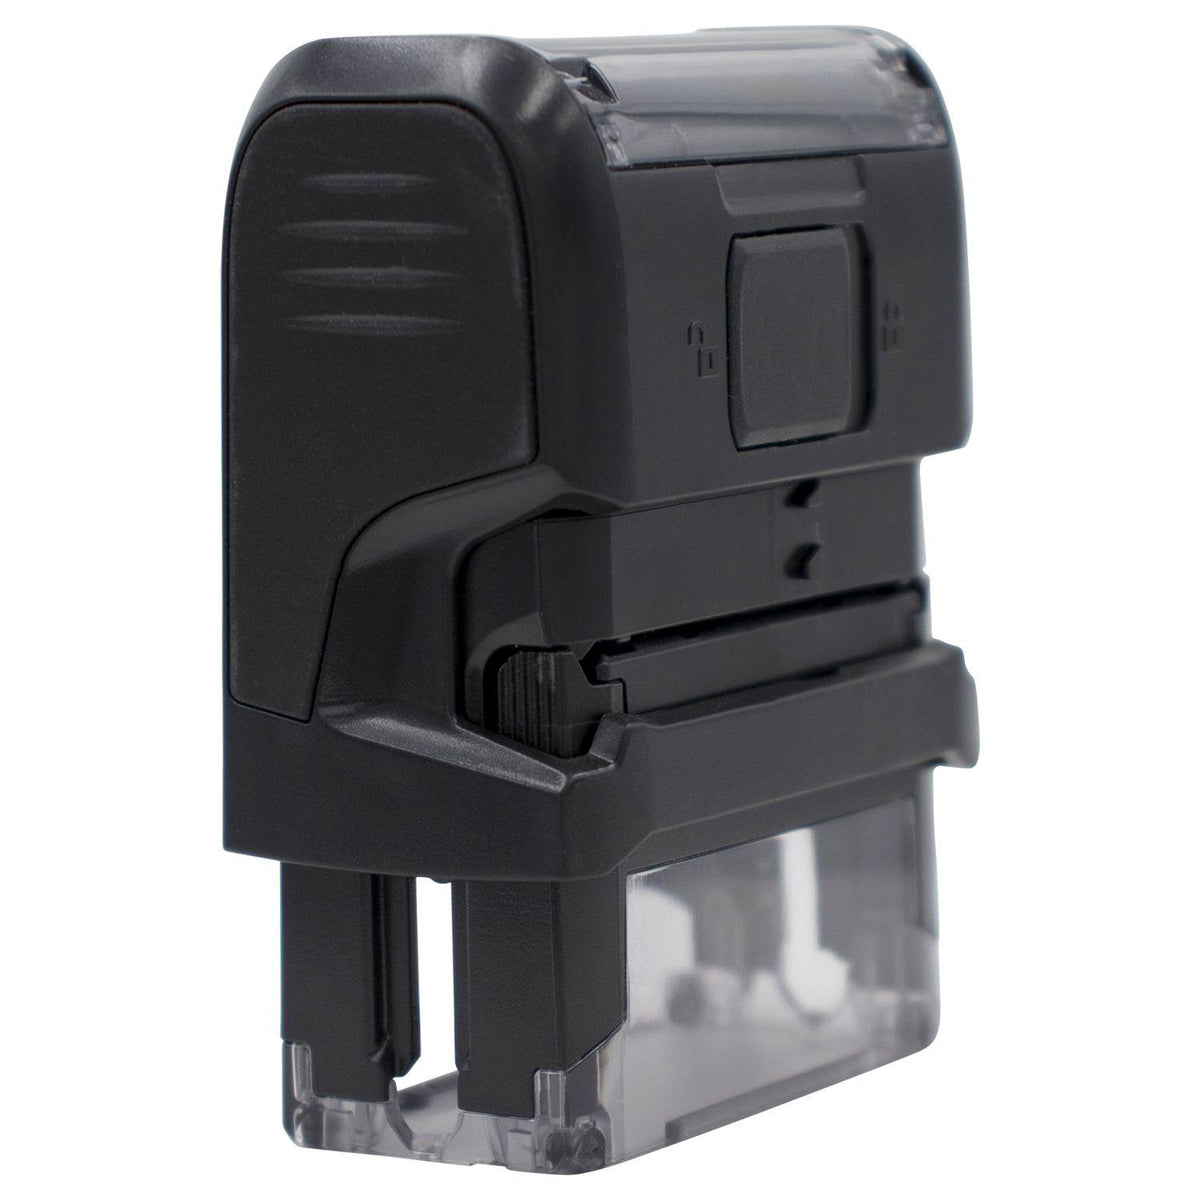 Large Self-Inking Recibido Stamp - Engineer Seal Stamps - Brand_Trodat, Impression Size_Large, Stamp Type_Self-Inking Stamp, Type of Use_Office, Type of Use_Postal &amp; Mailing, Type of Use_Shipping &amp; Receiving